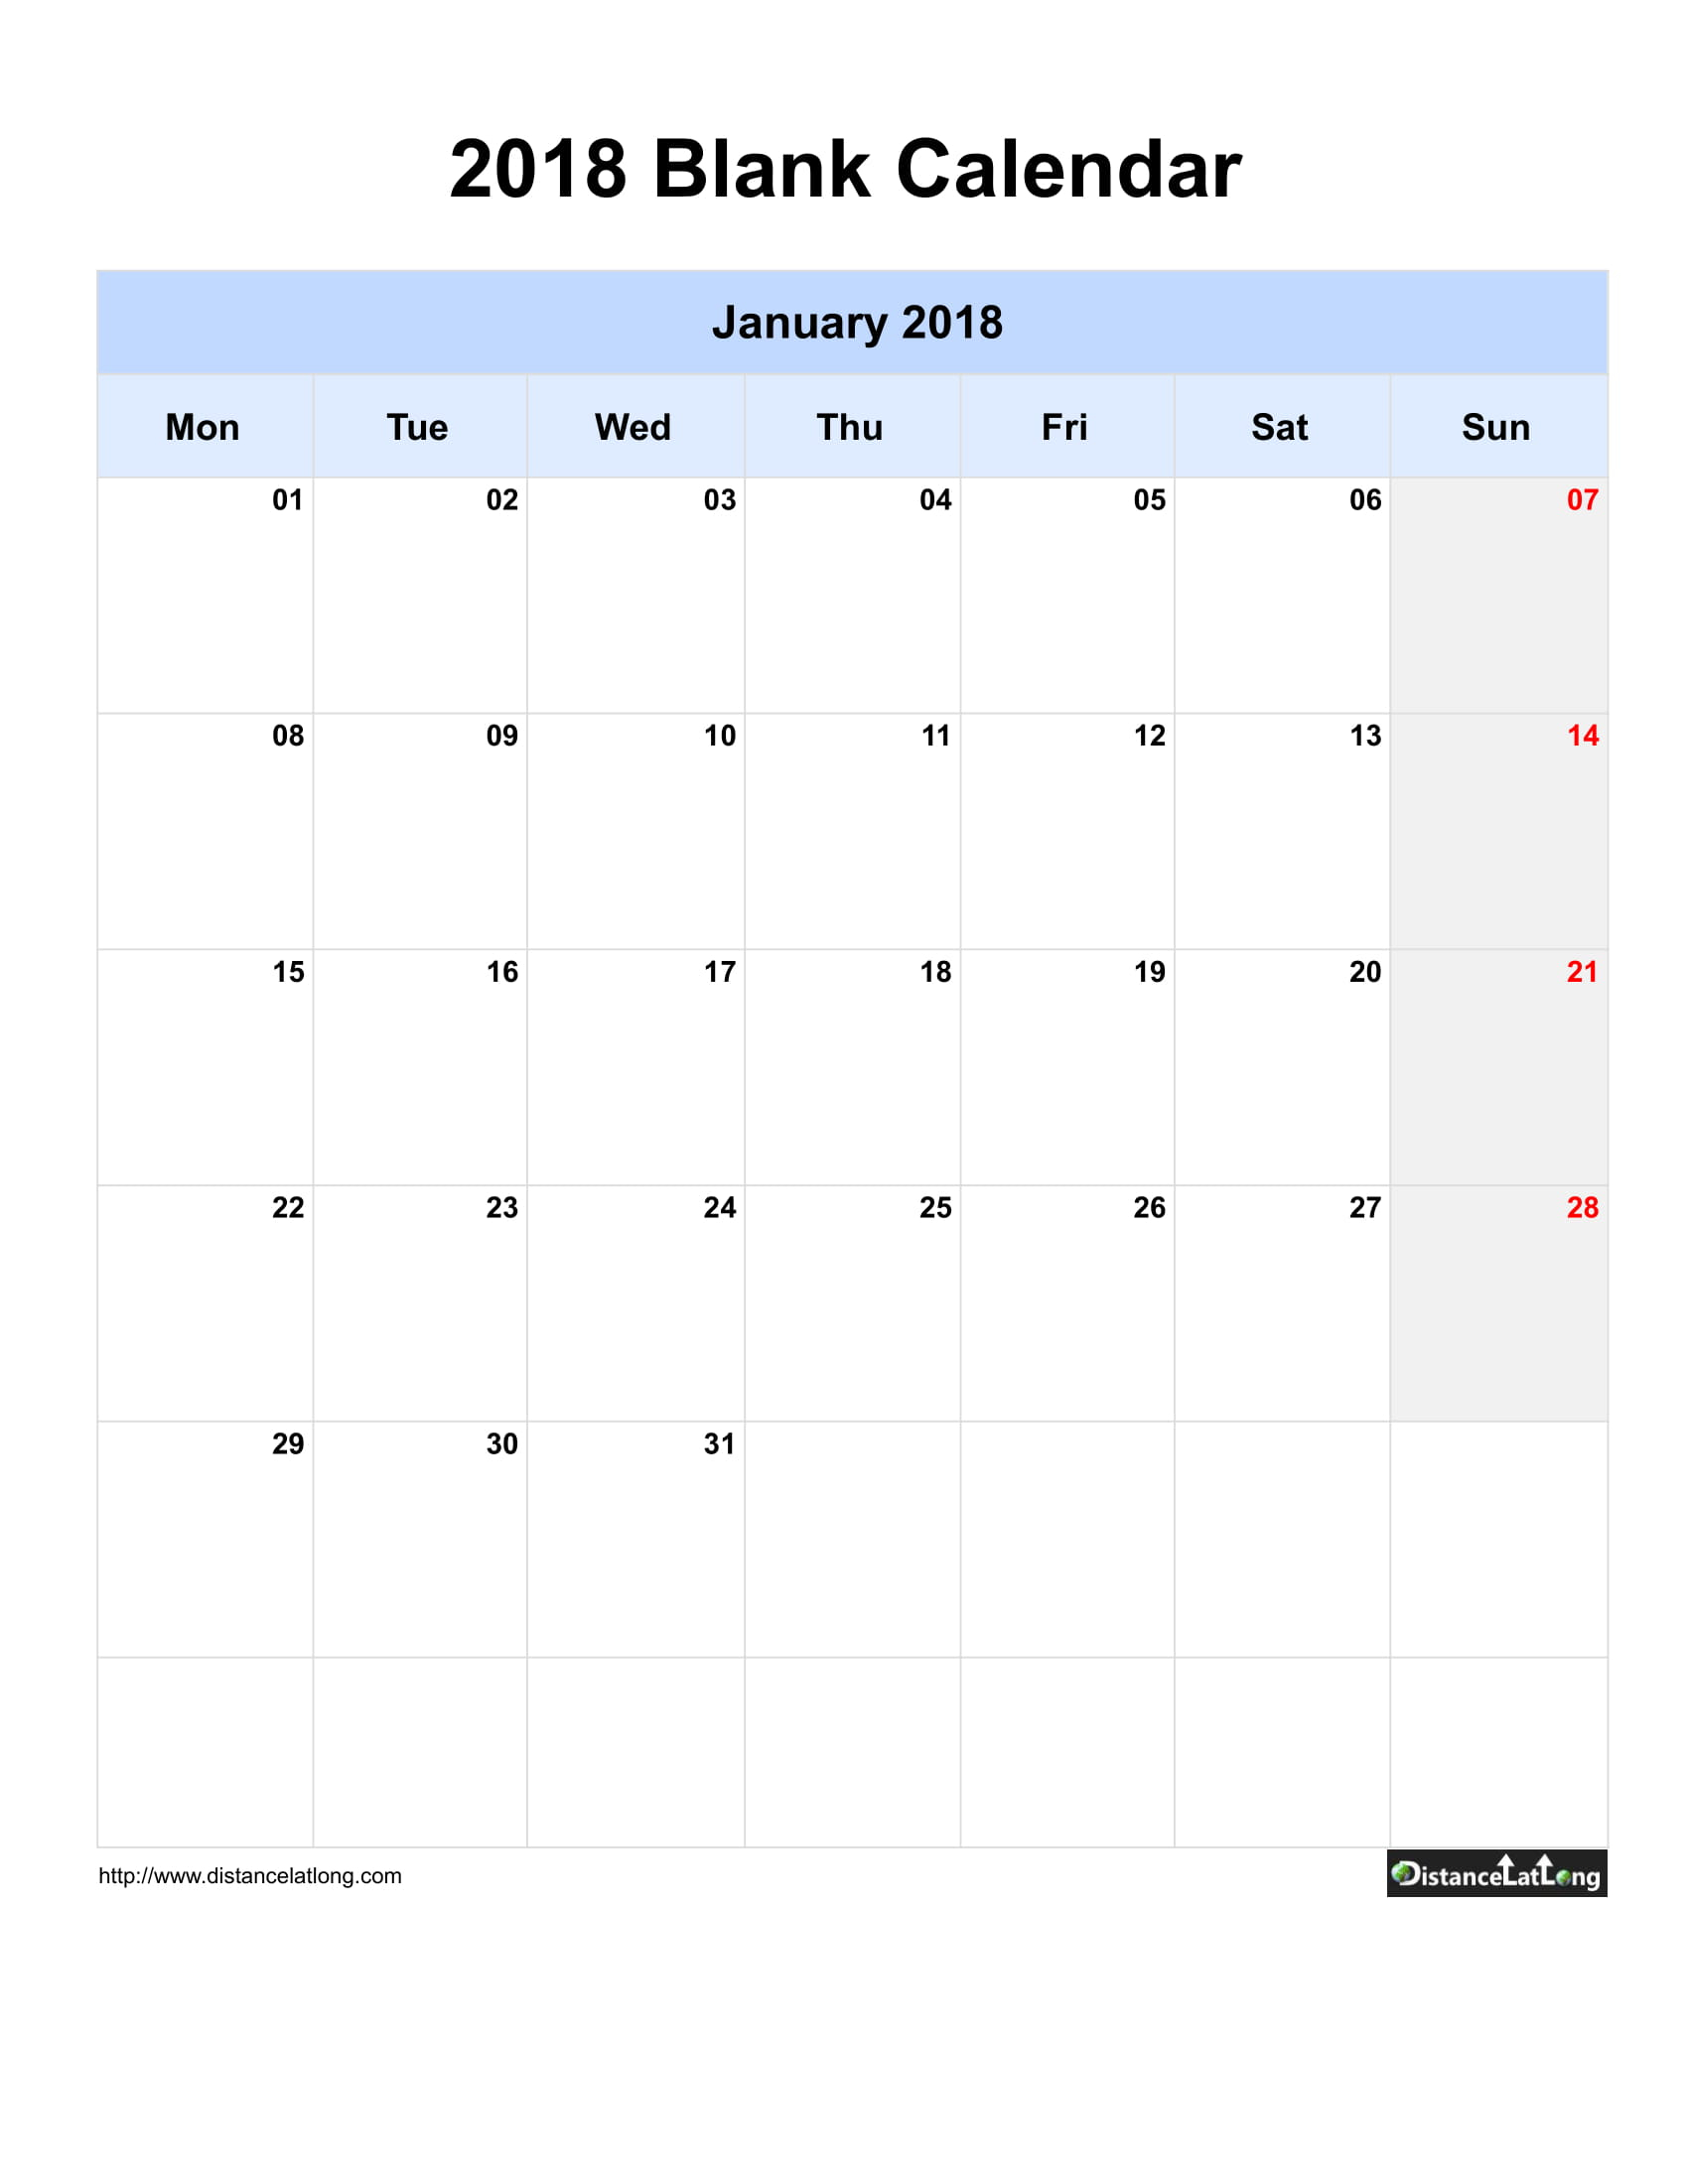 January Calendars For Pdf, Words And Jpg Formats